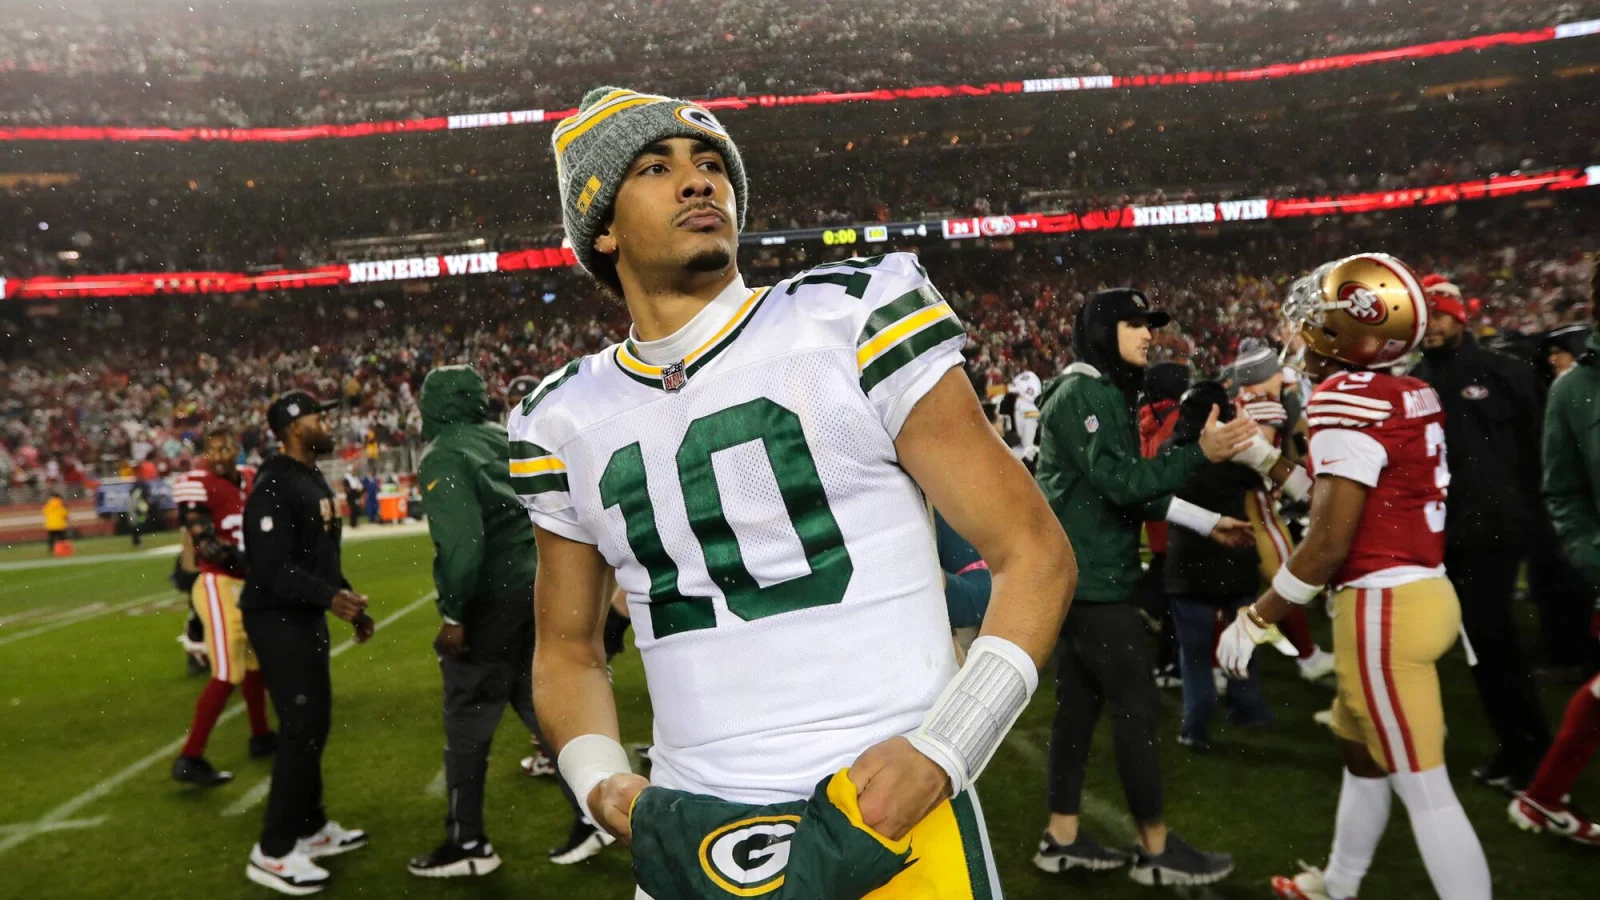 Jordan Love's Vision for Green Bay Packers Super Bowl Aspirations and Leadership Excellence